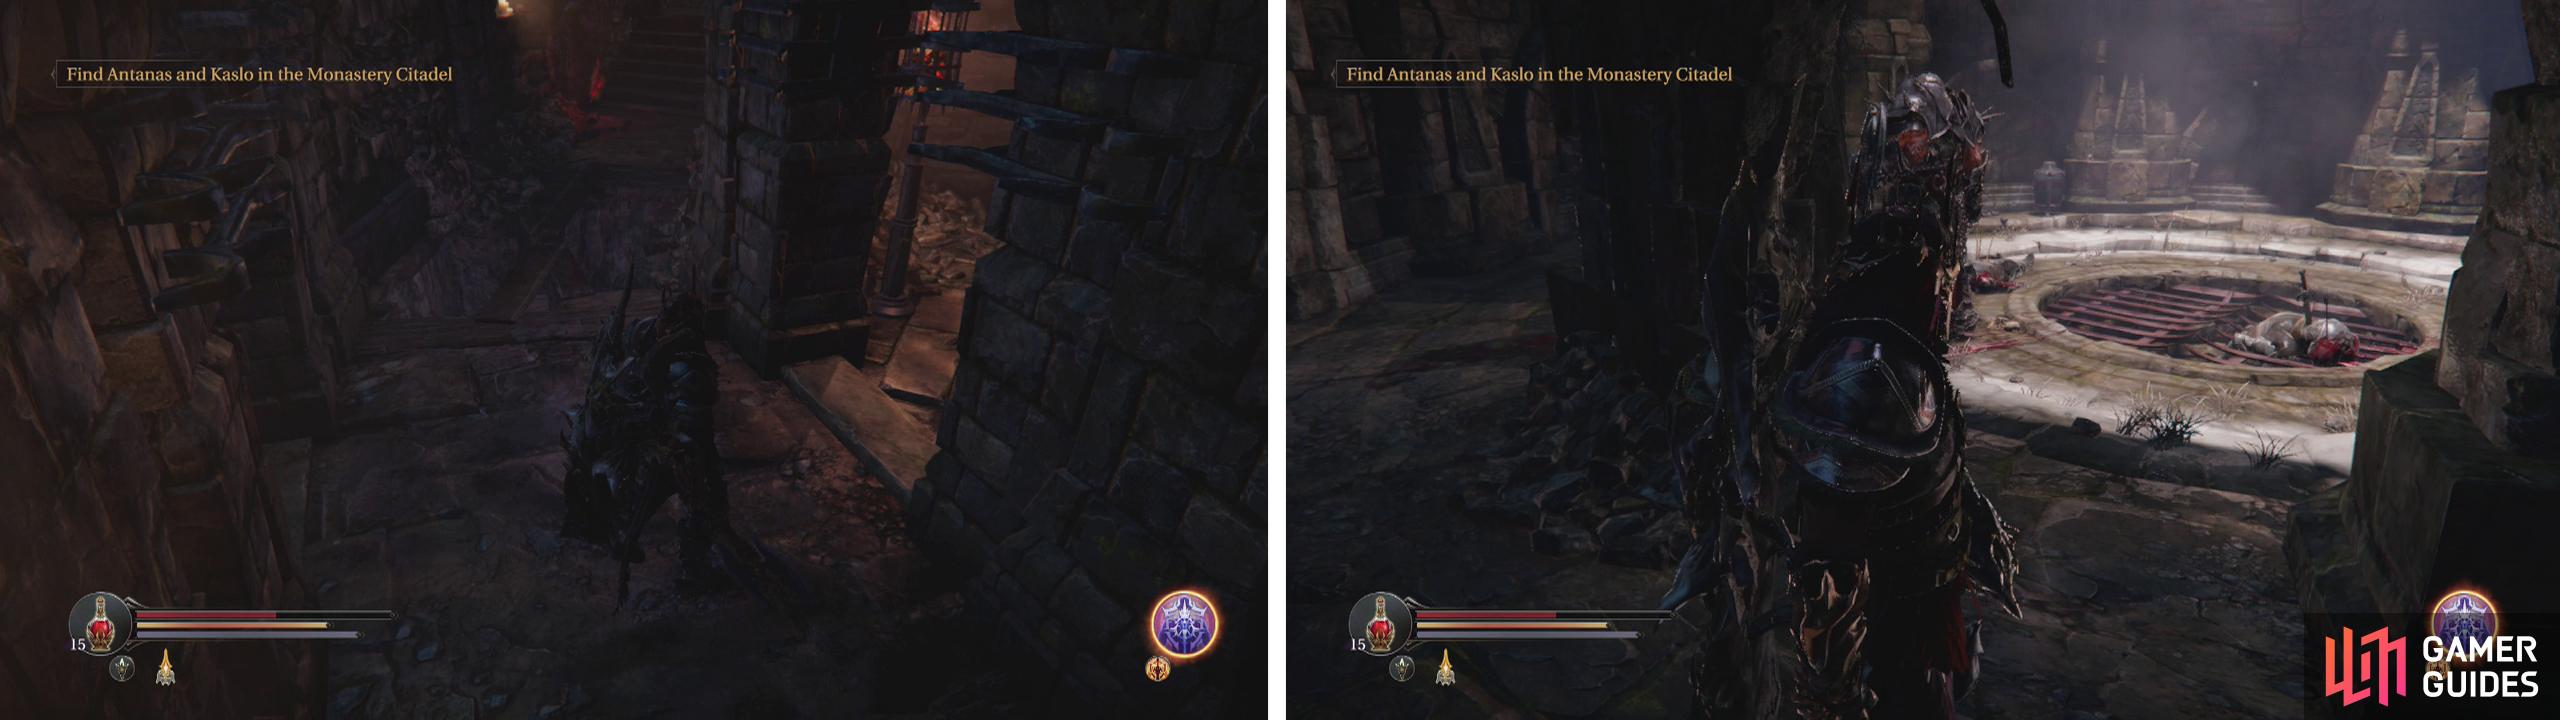 Jump across the gap bridged by the wooden plank (left) and then fight the Knight in the cirular room (right).